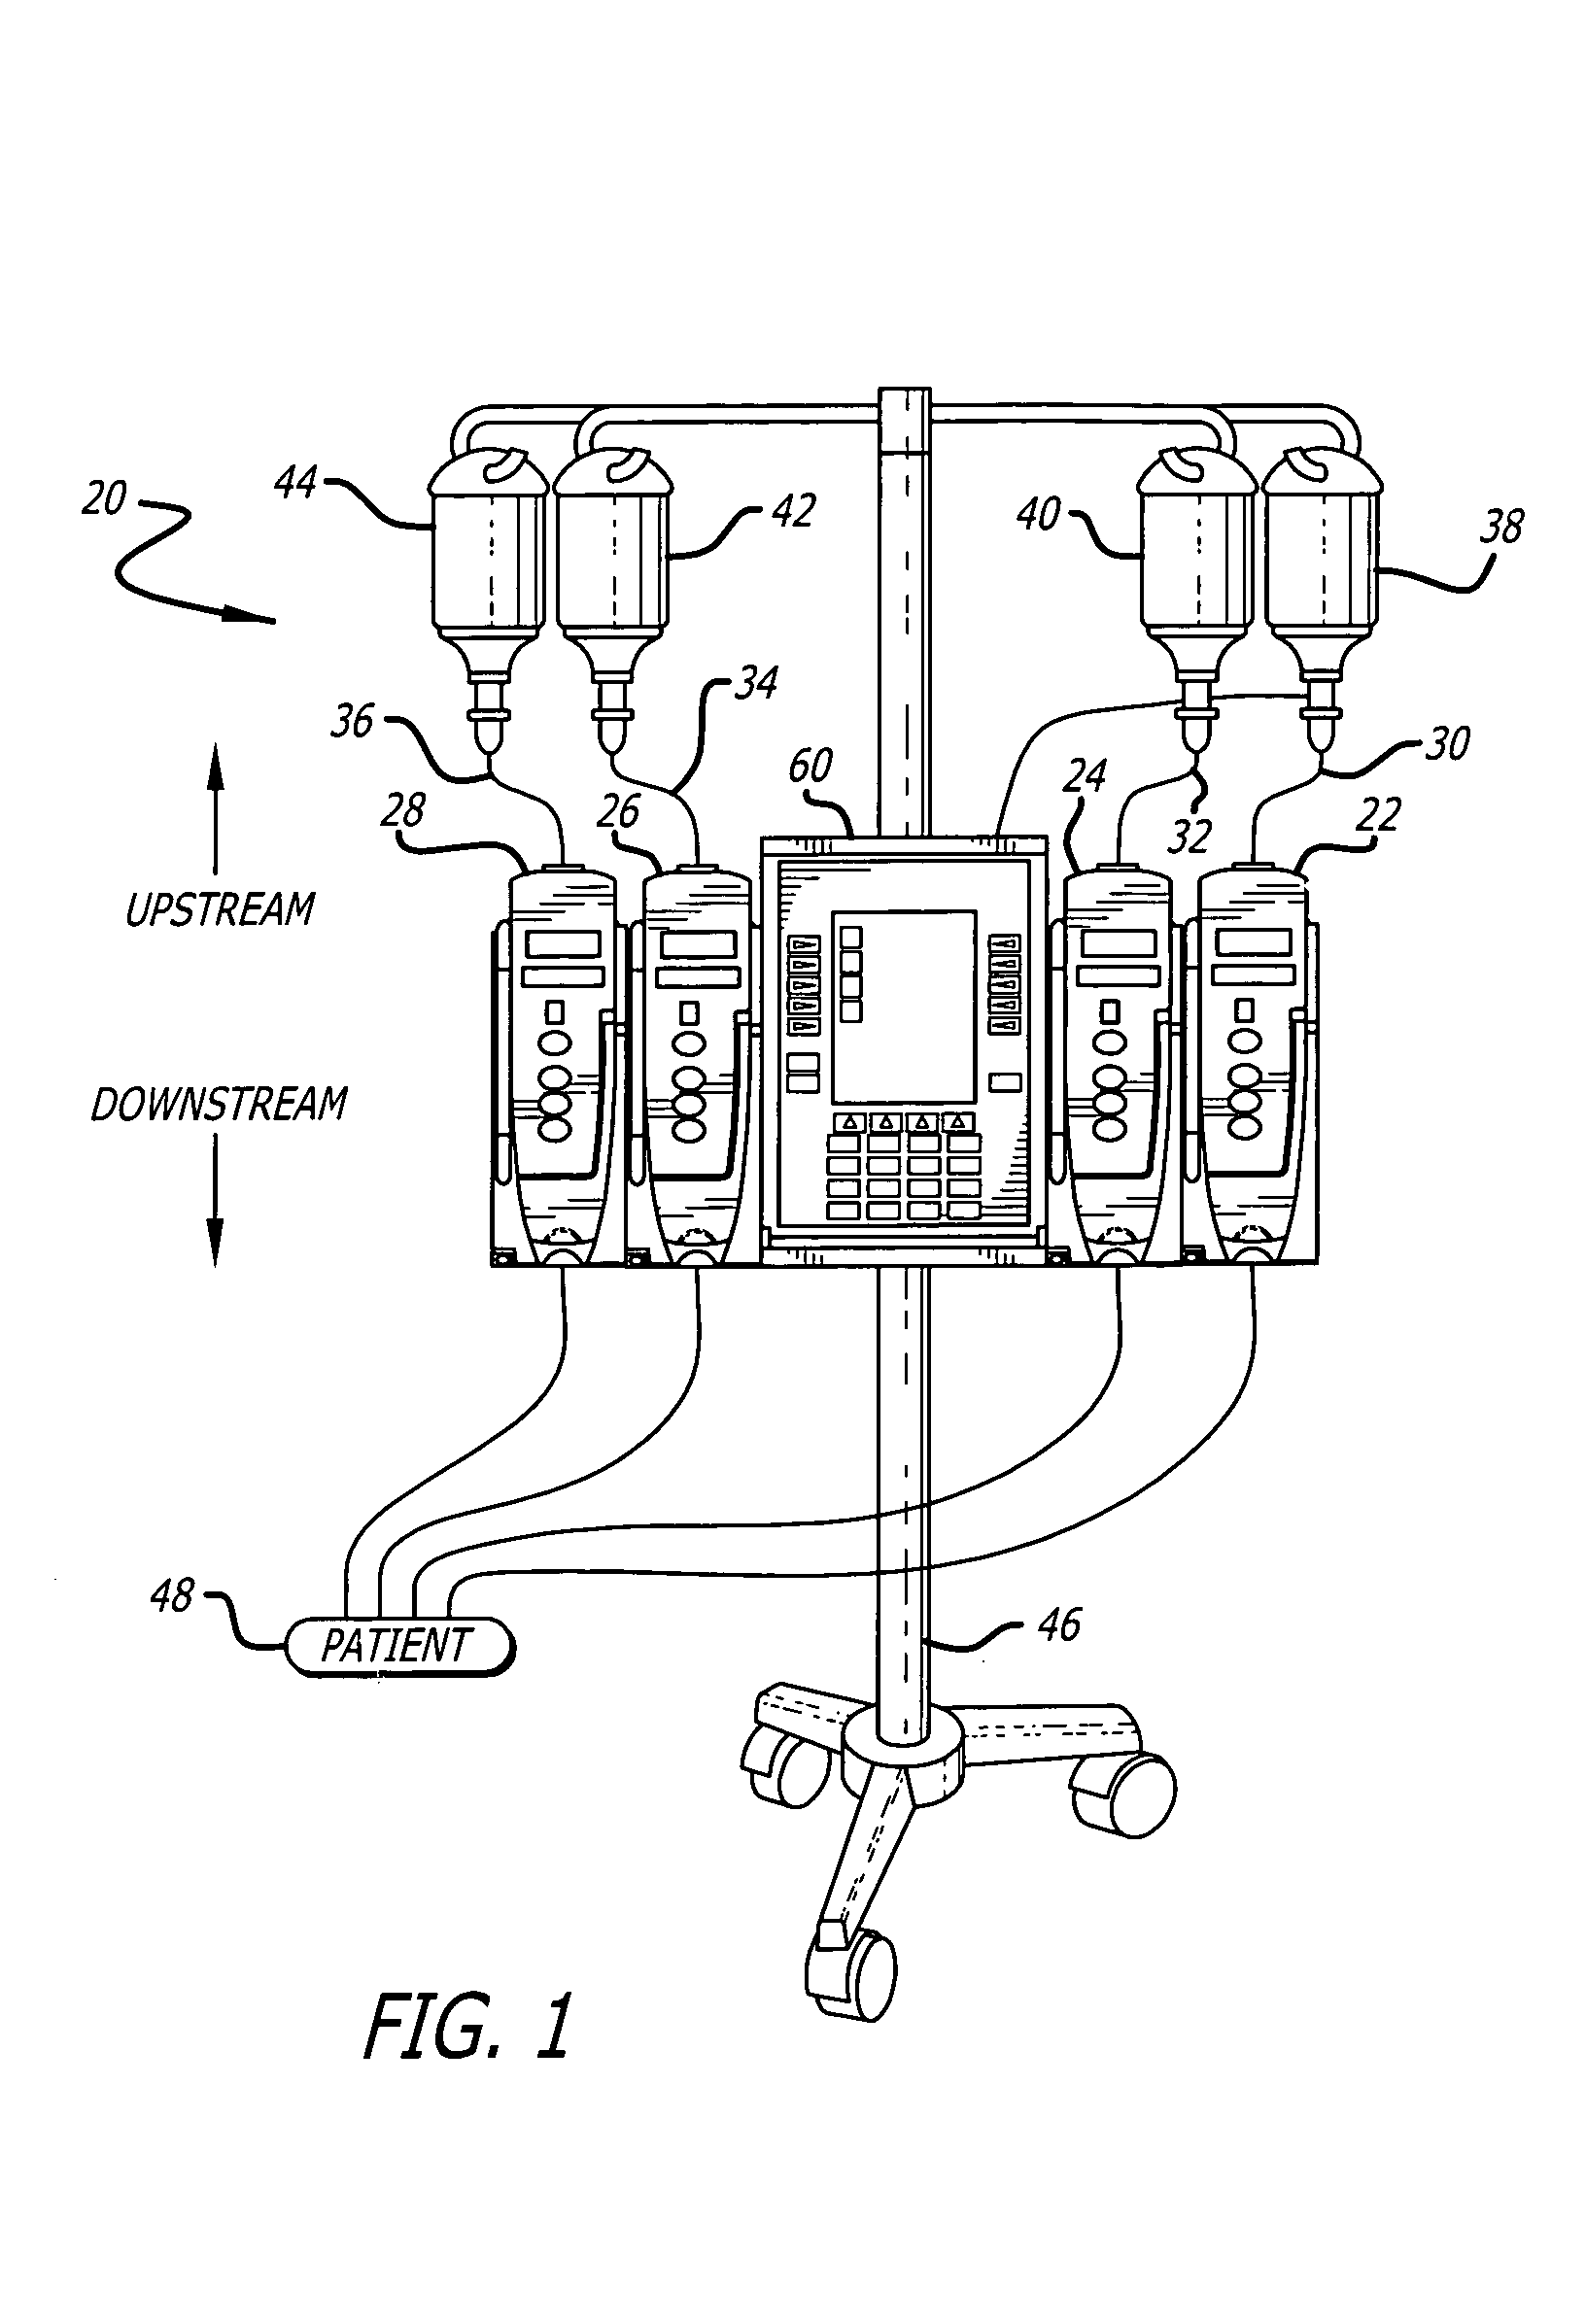 System and method for verifying connection of correct fluid supply to an infusion pump